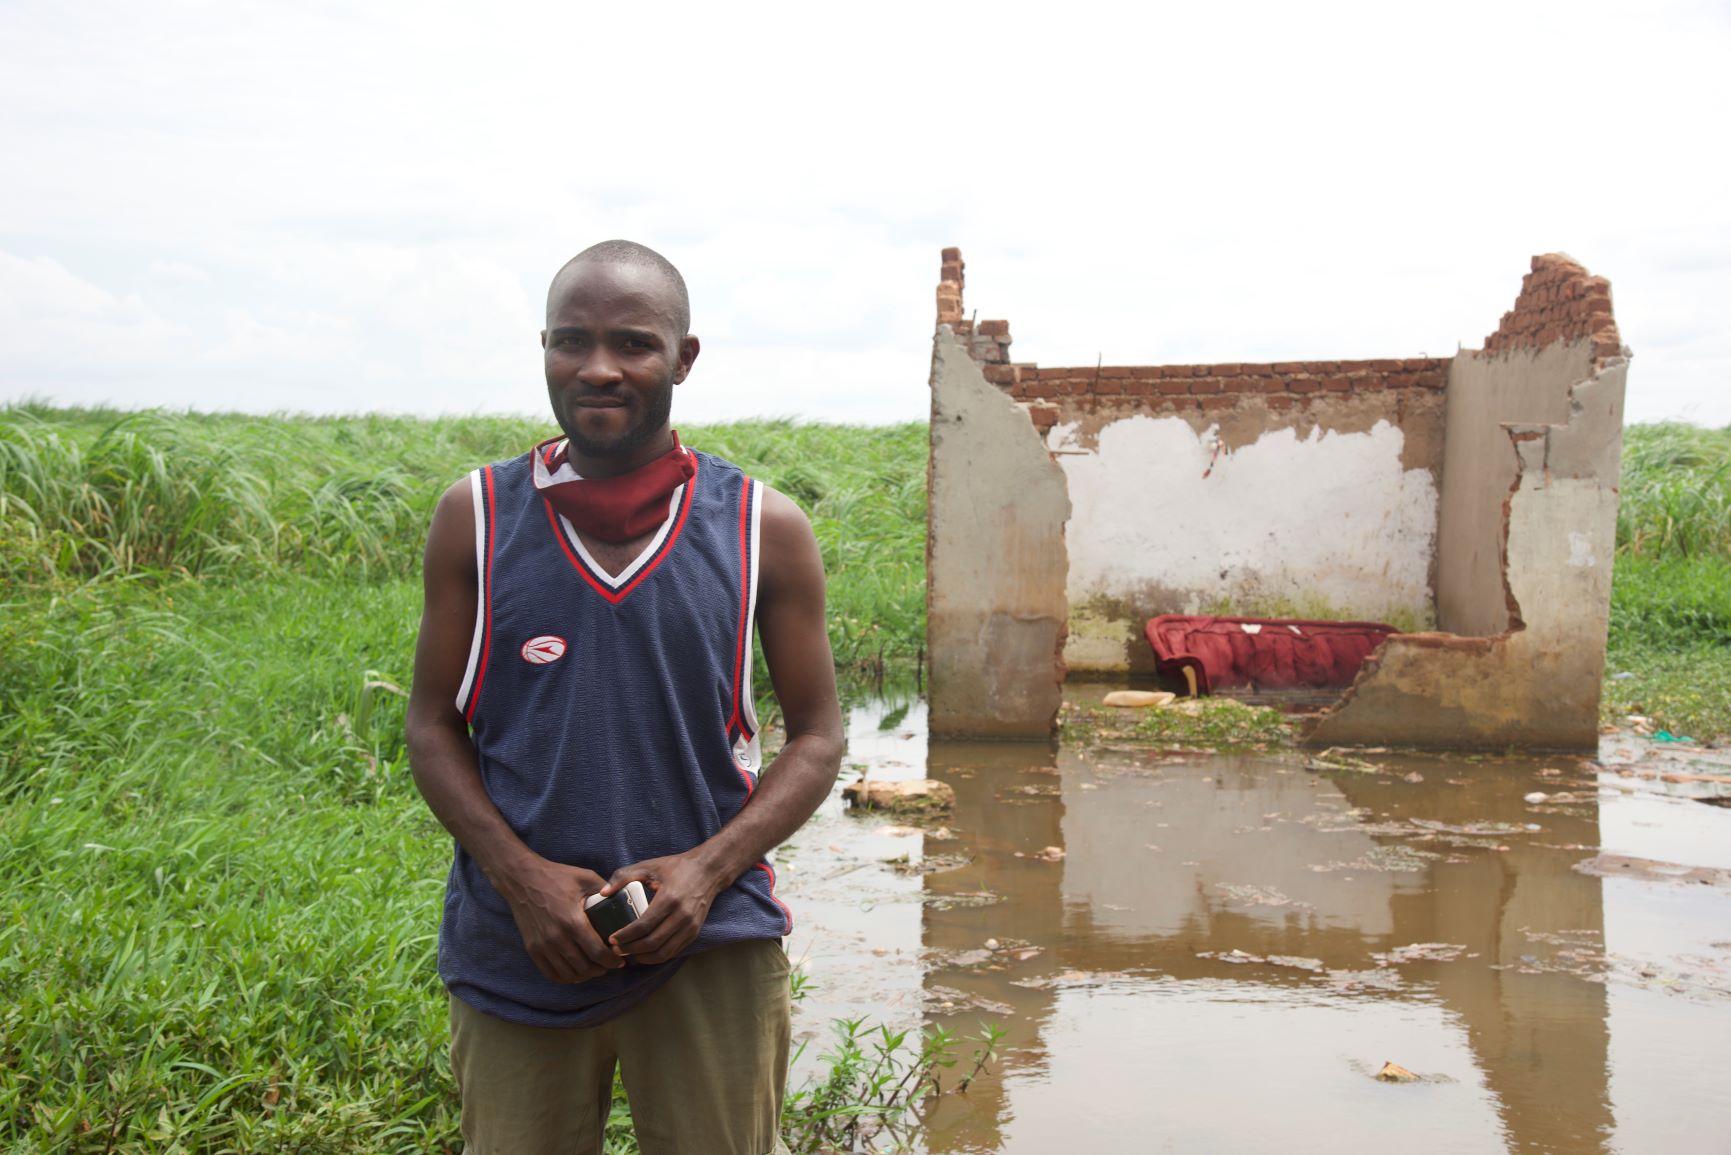 Silus Musasizi stands in front of a destroyed building by Lake Victoria in Entebbe, Uganda on June 2, 2020. Thomson Reuters Foundation/Isaac Kasamani